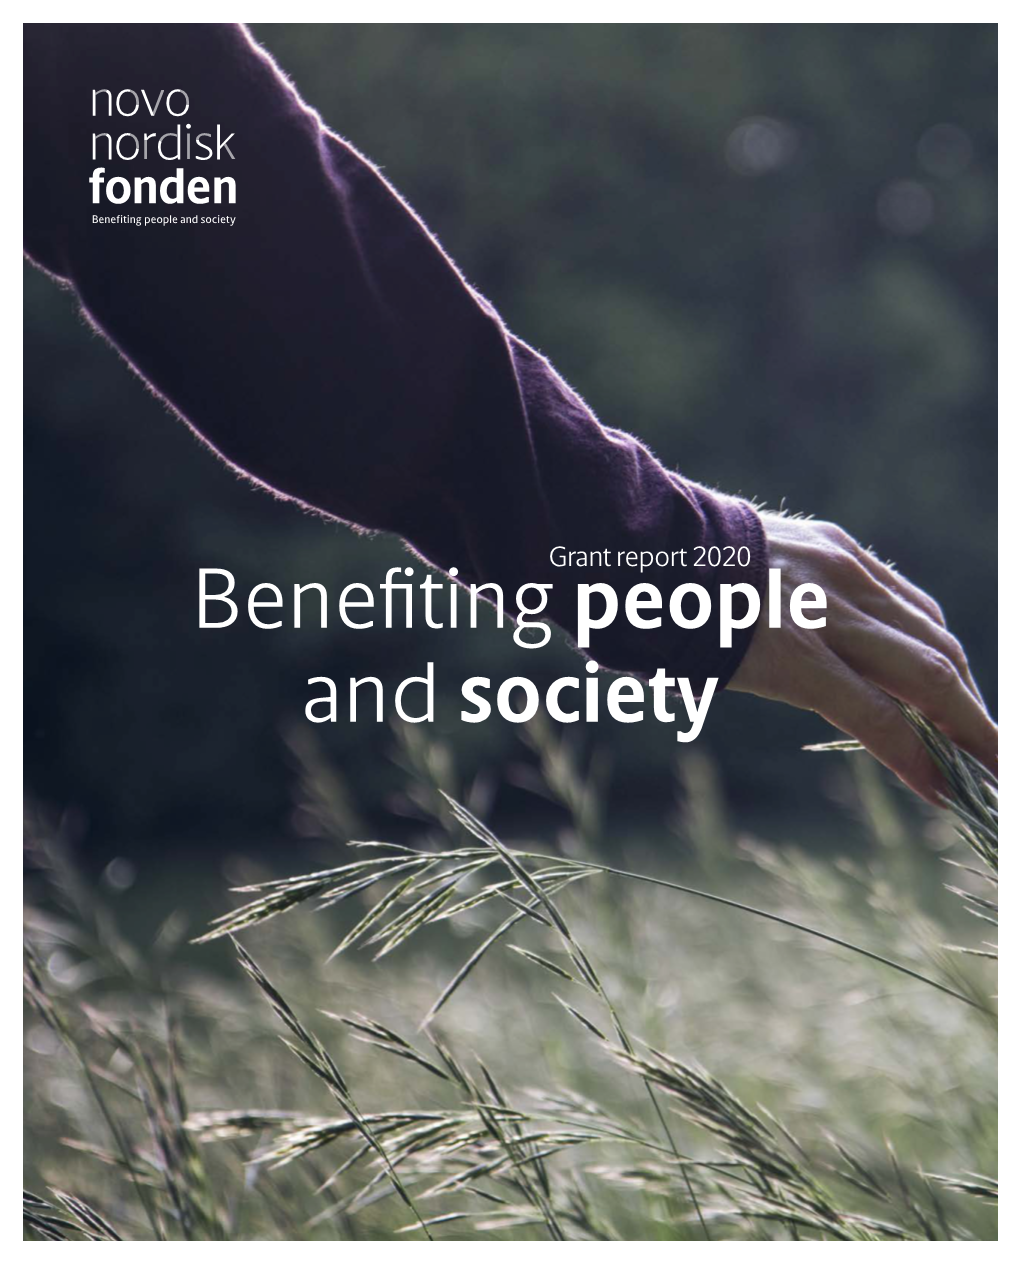 Read the Full Report “Benefiting People and Society” Here